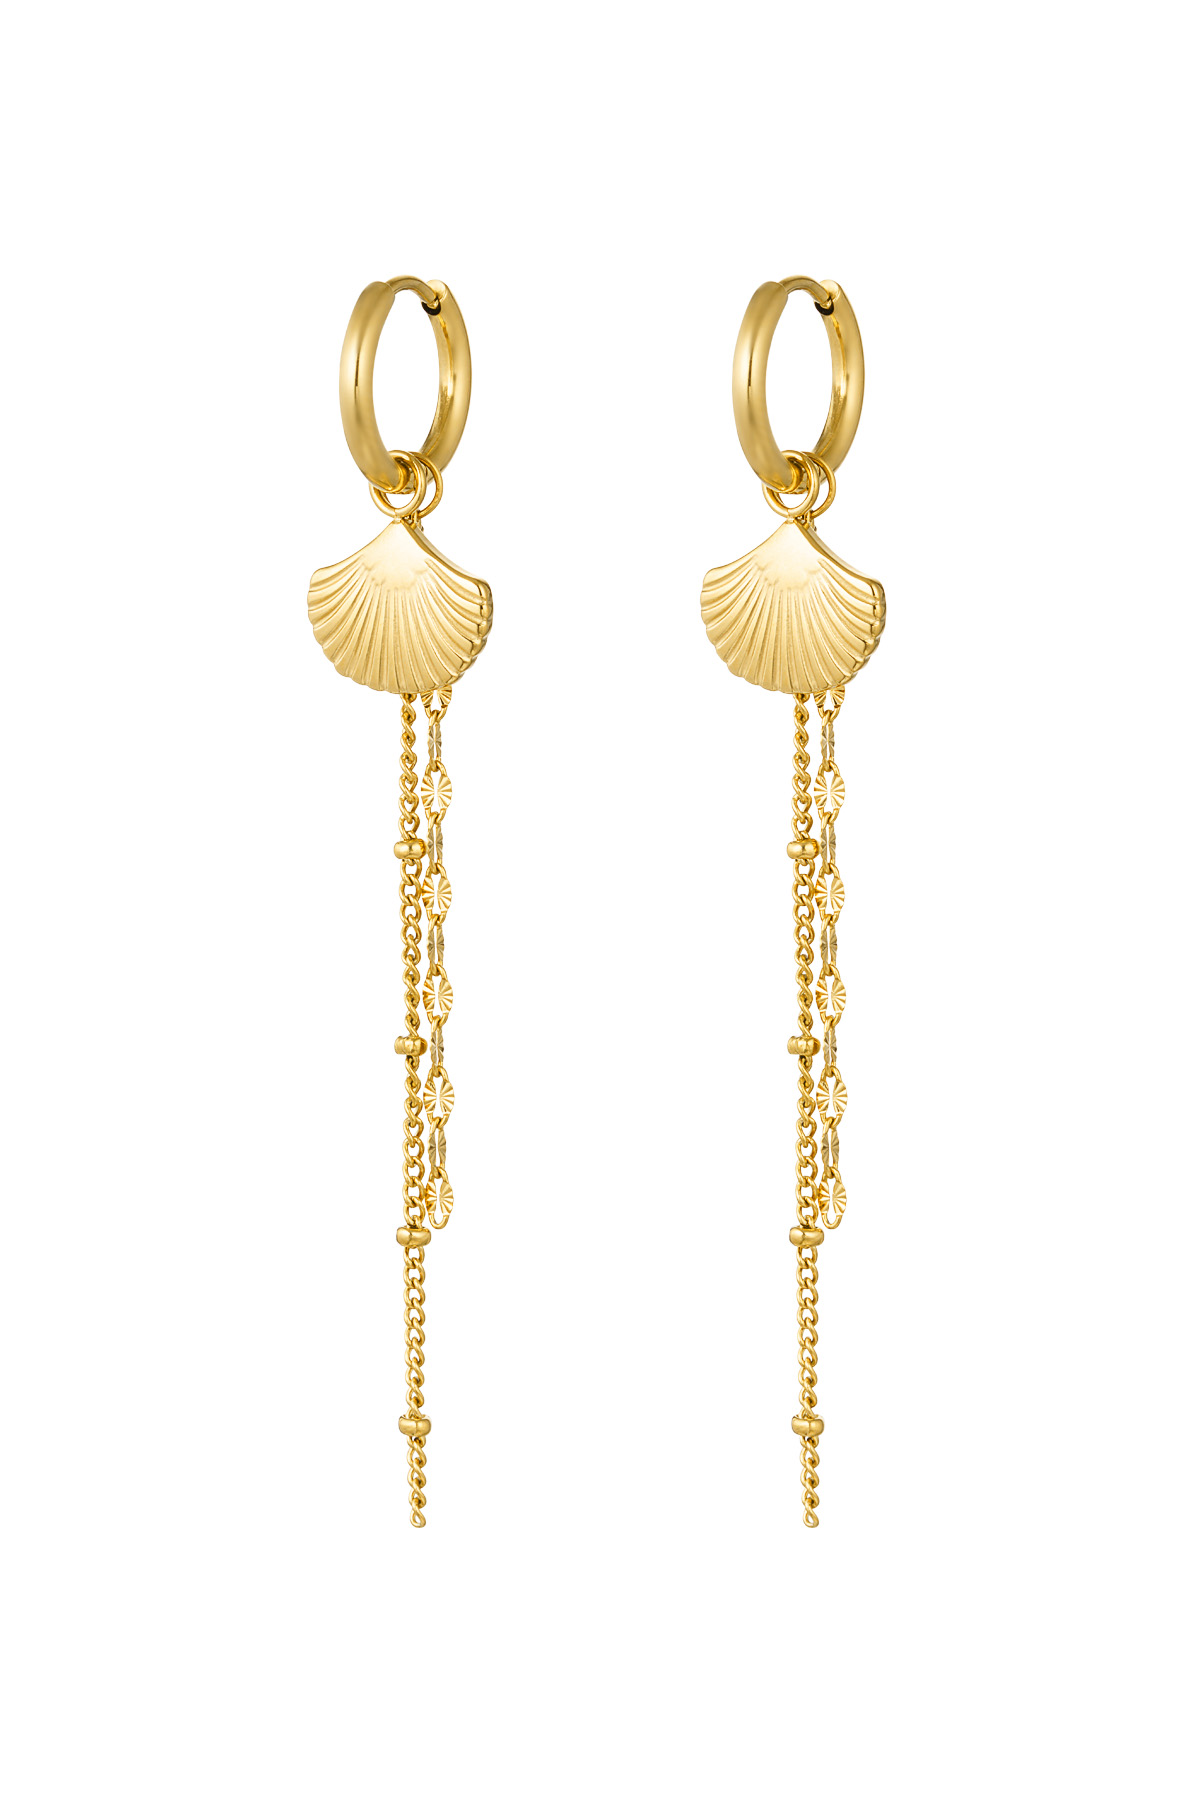 Earrings shell with chain - gold 